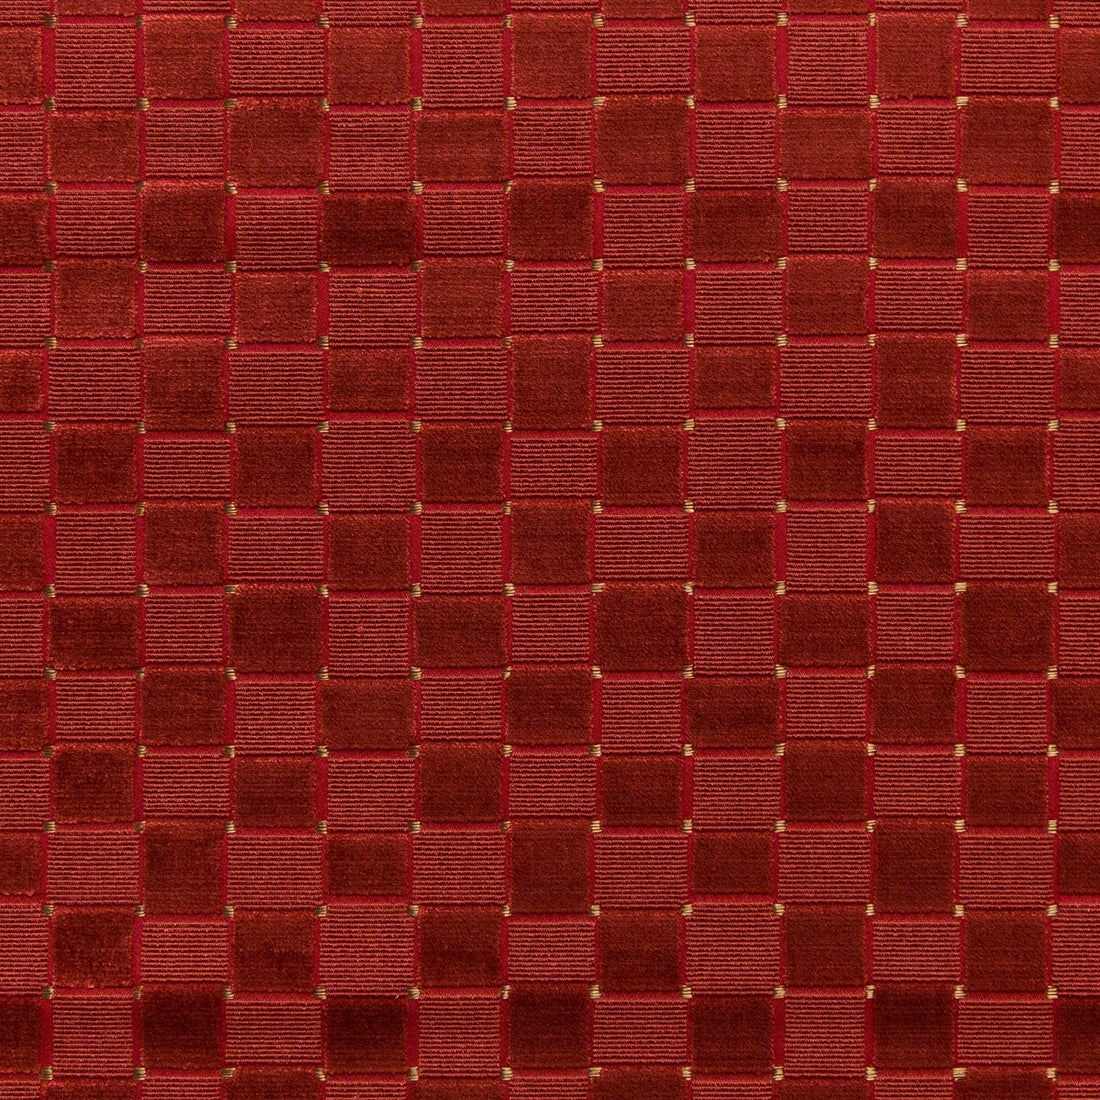 Levens Velvet fabric in ruby color - pattern 2019118.19.0 - by Lee Jofa in the Harlington Velvets collection